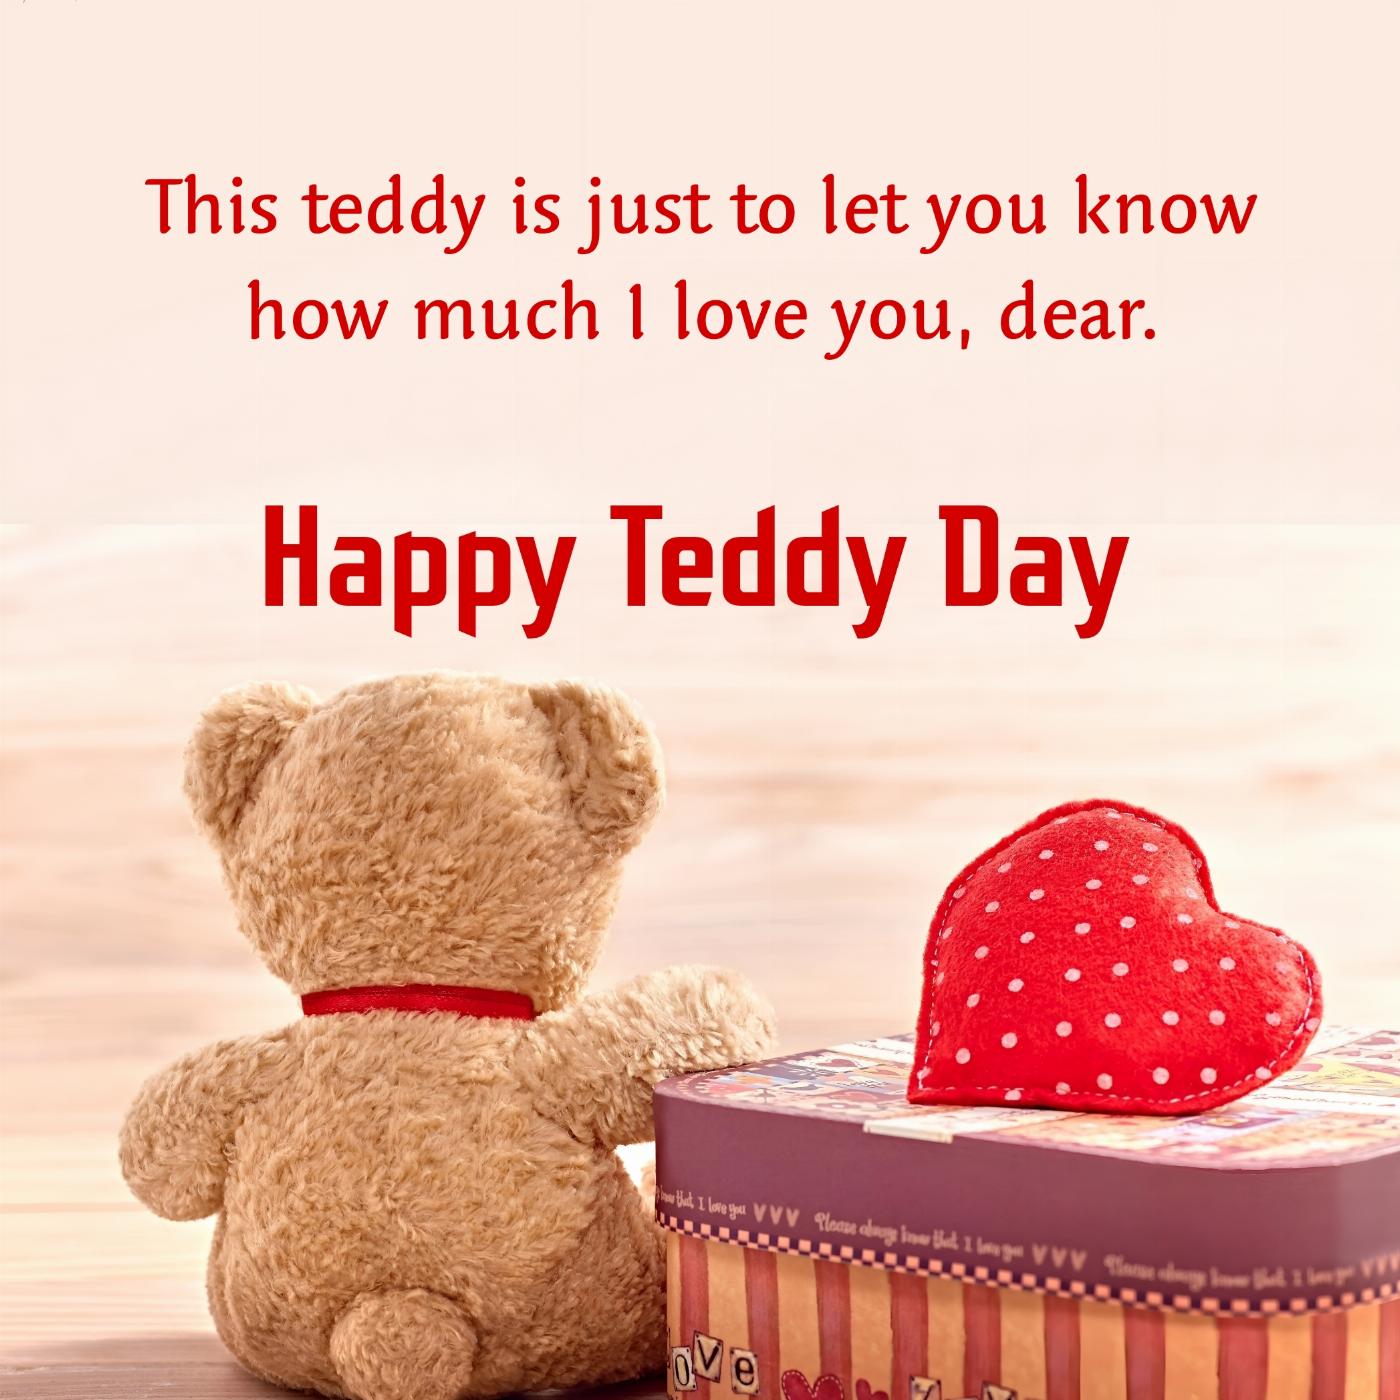 This teddy is just to let you know how much I love you